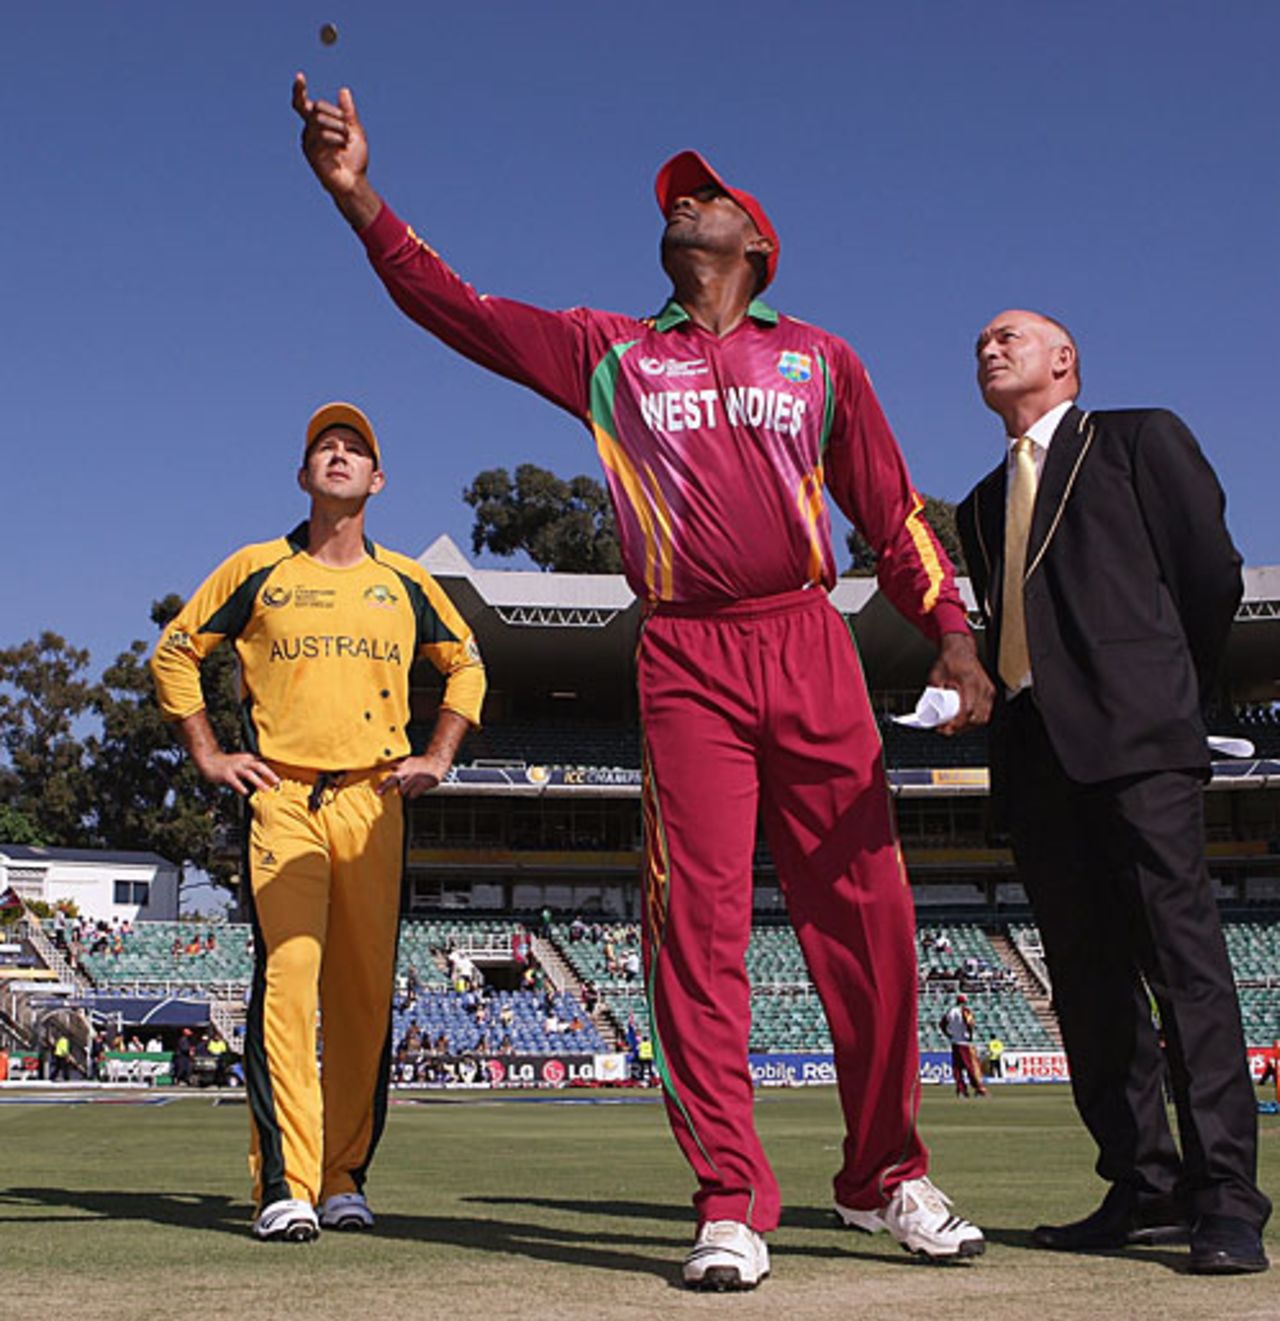 Floyd Reifer won the toss and chose to field, Australia v West Indies, ICC Champions Trophy, Group A, Johannesburg, September 26, 2009